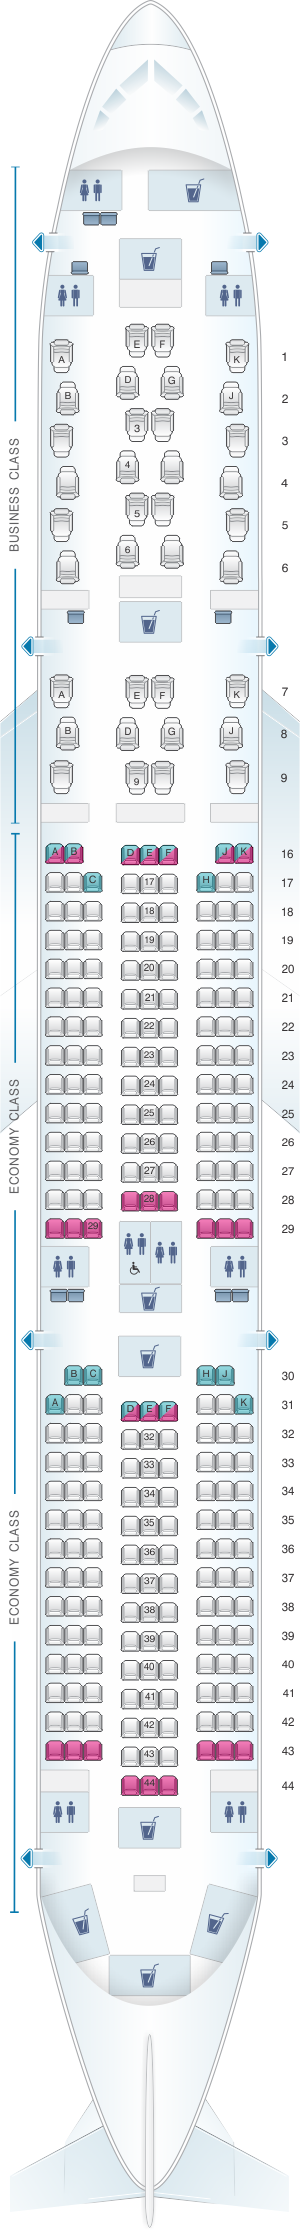 Seat Map Qatar Airlines Airbus A350 900 339pax 